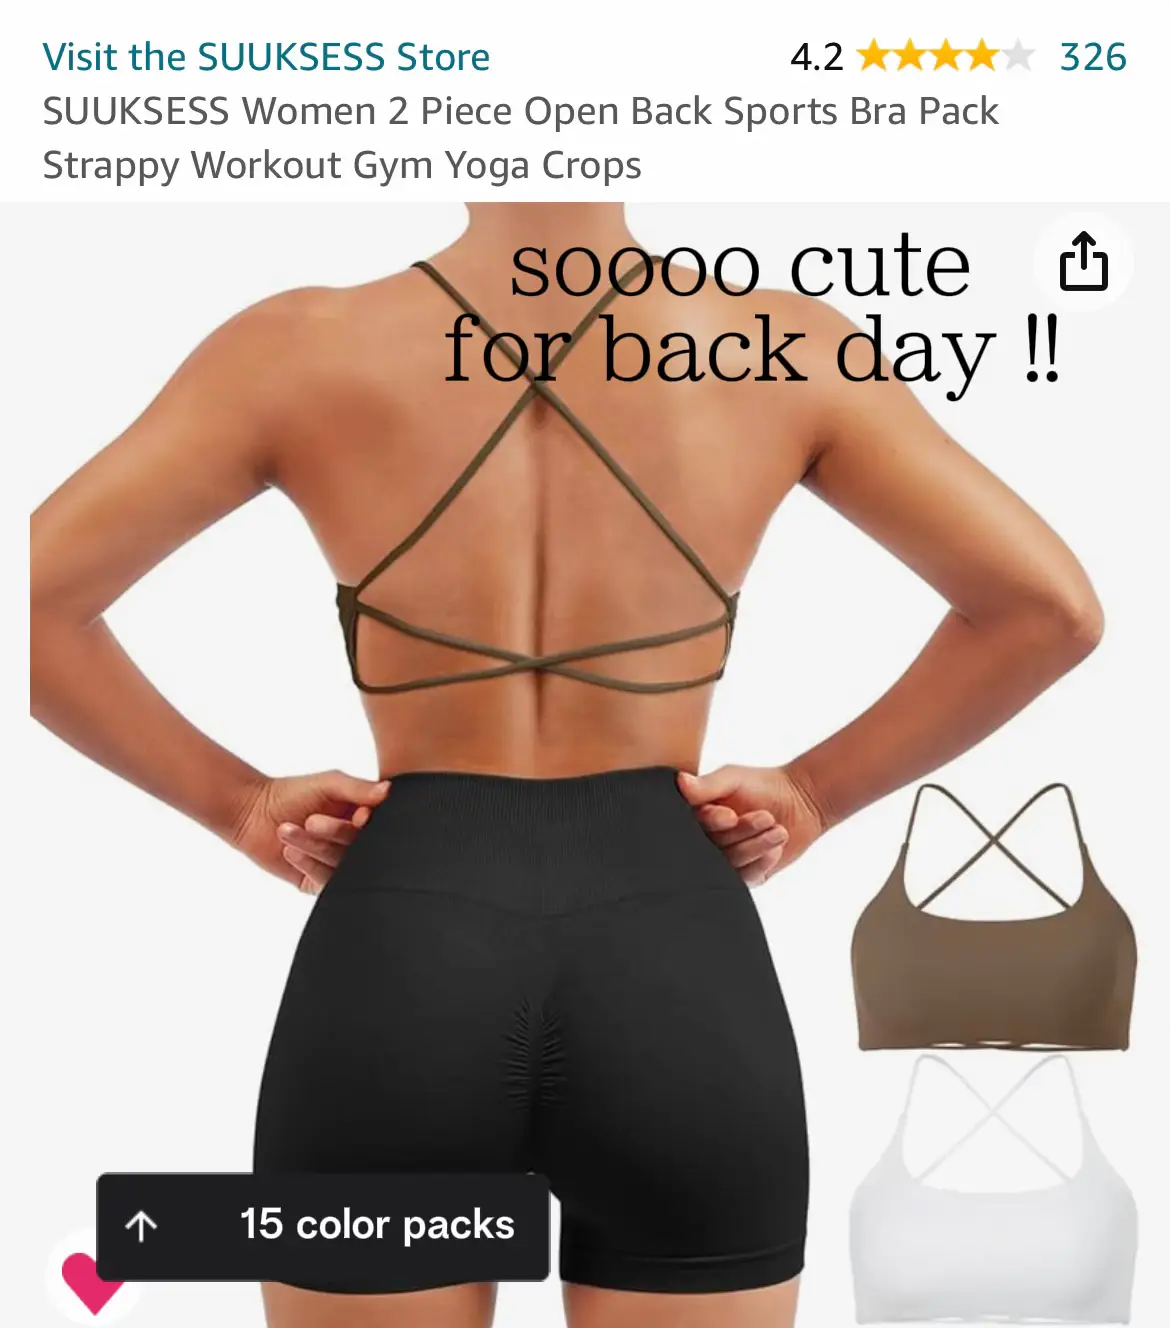 SUUKSESS Women 2 Piece Open Back Sports Bra Pack Strappy Workout Gym Yoga  Crops